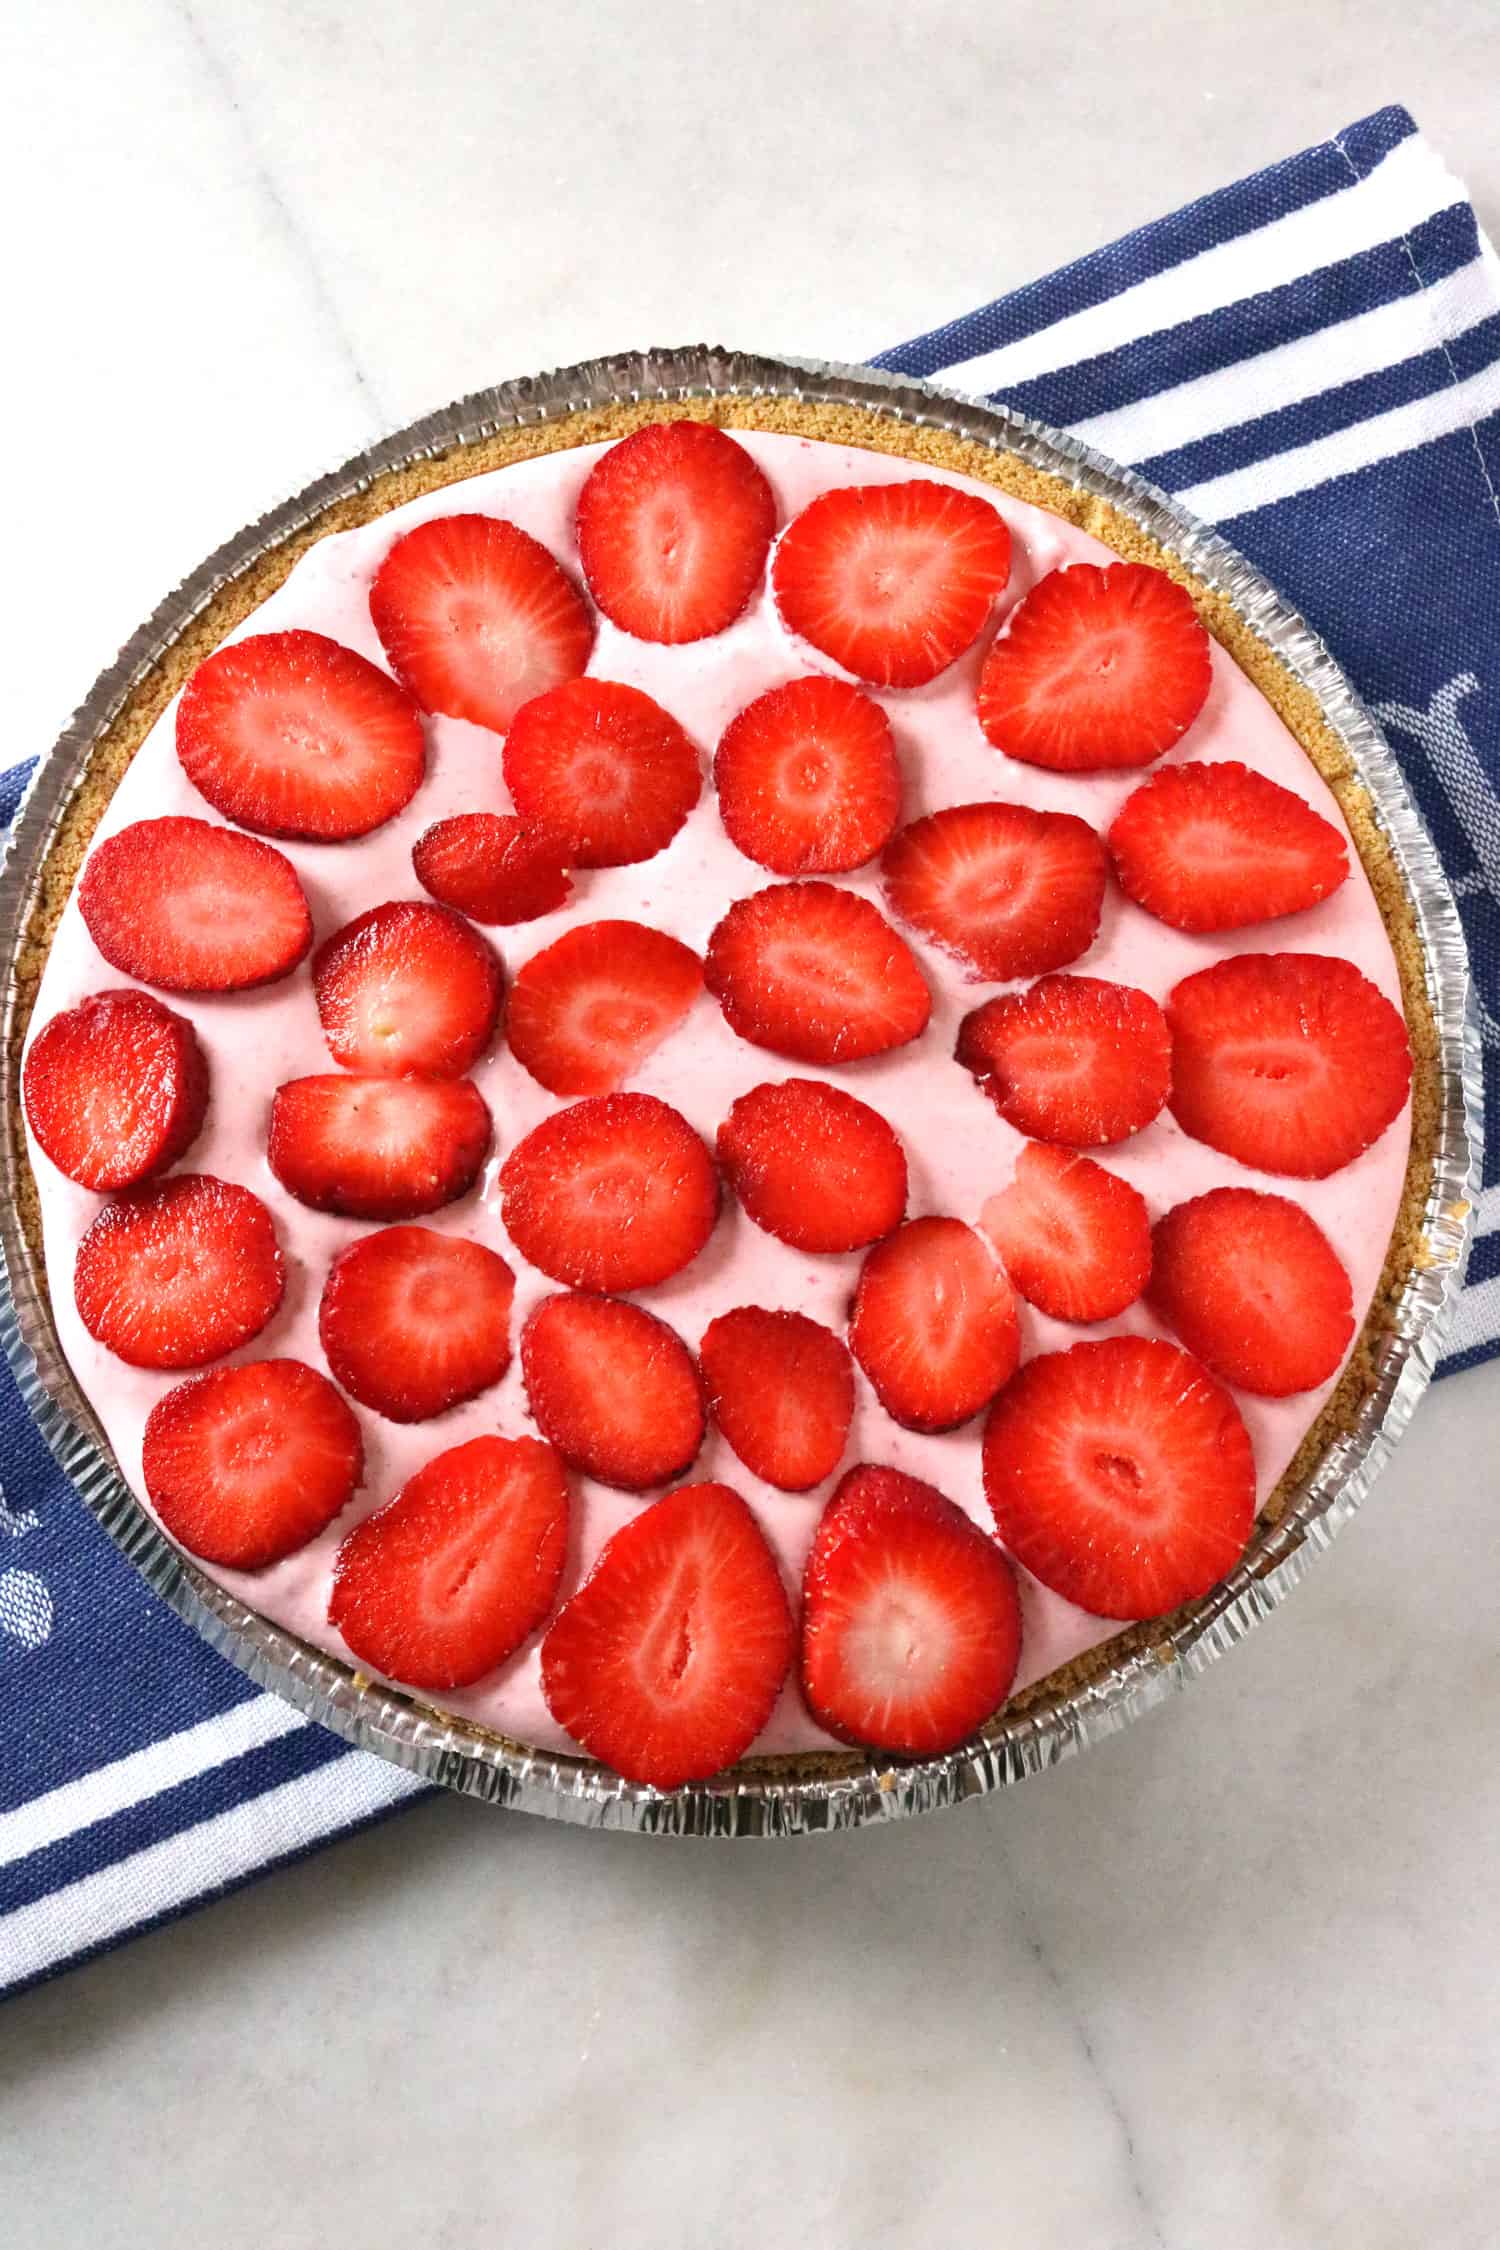 finished pie topped with fresh strawberry slices sitting on blue and white striped towel